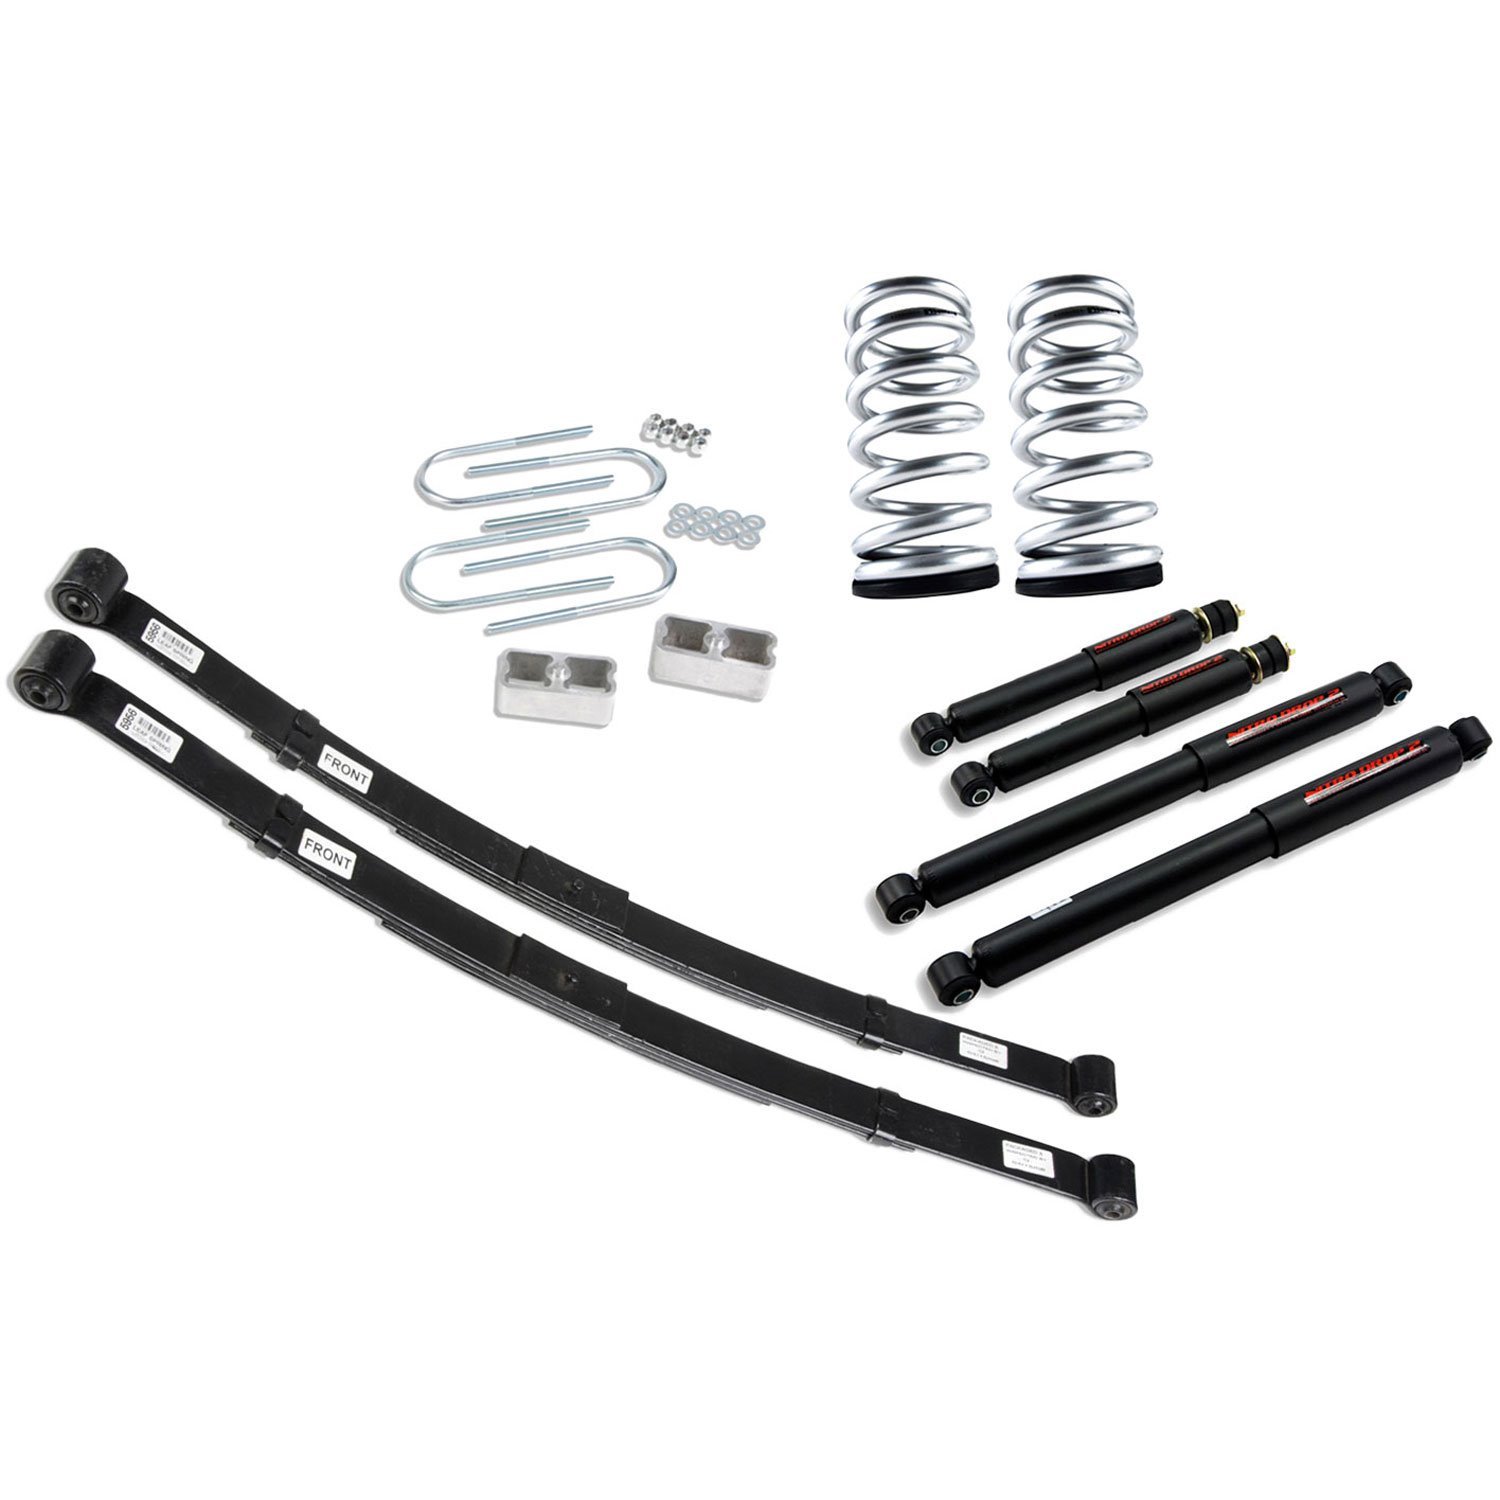 Complete Lowering Kit for 1982-2004 Chevy S10/GMC S15 Extended/Standard Cab